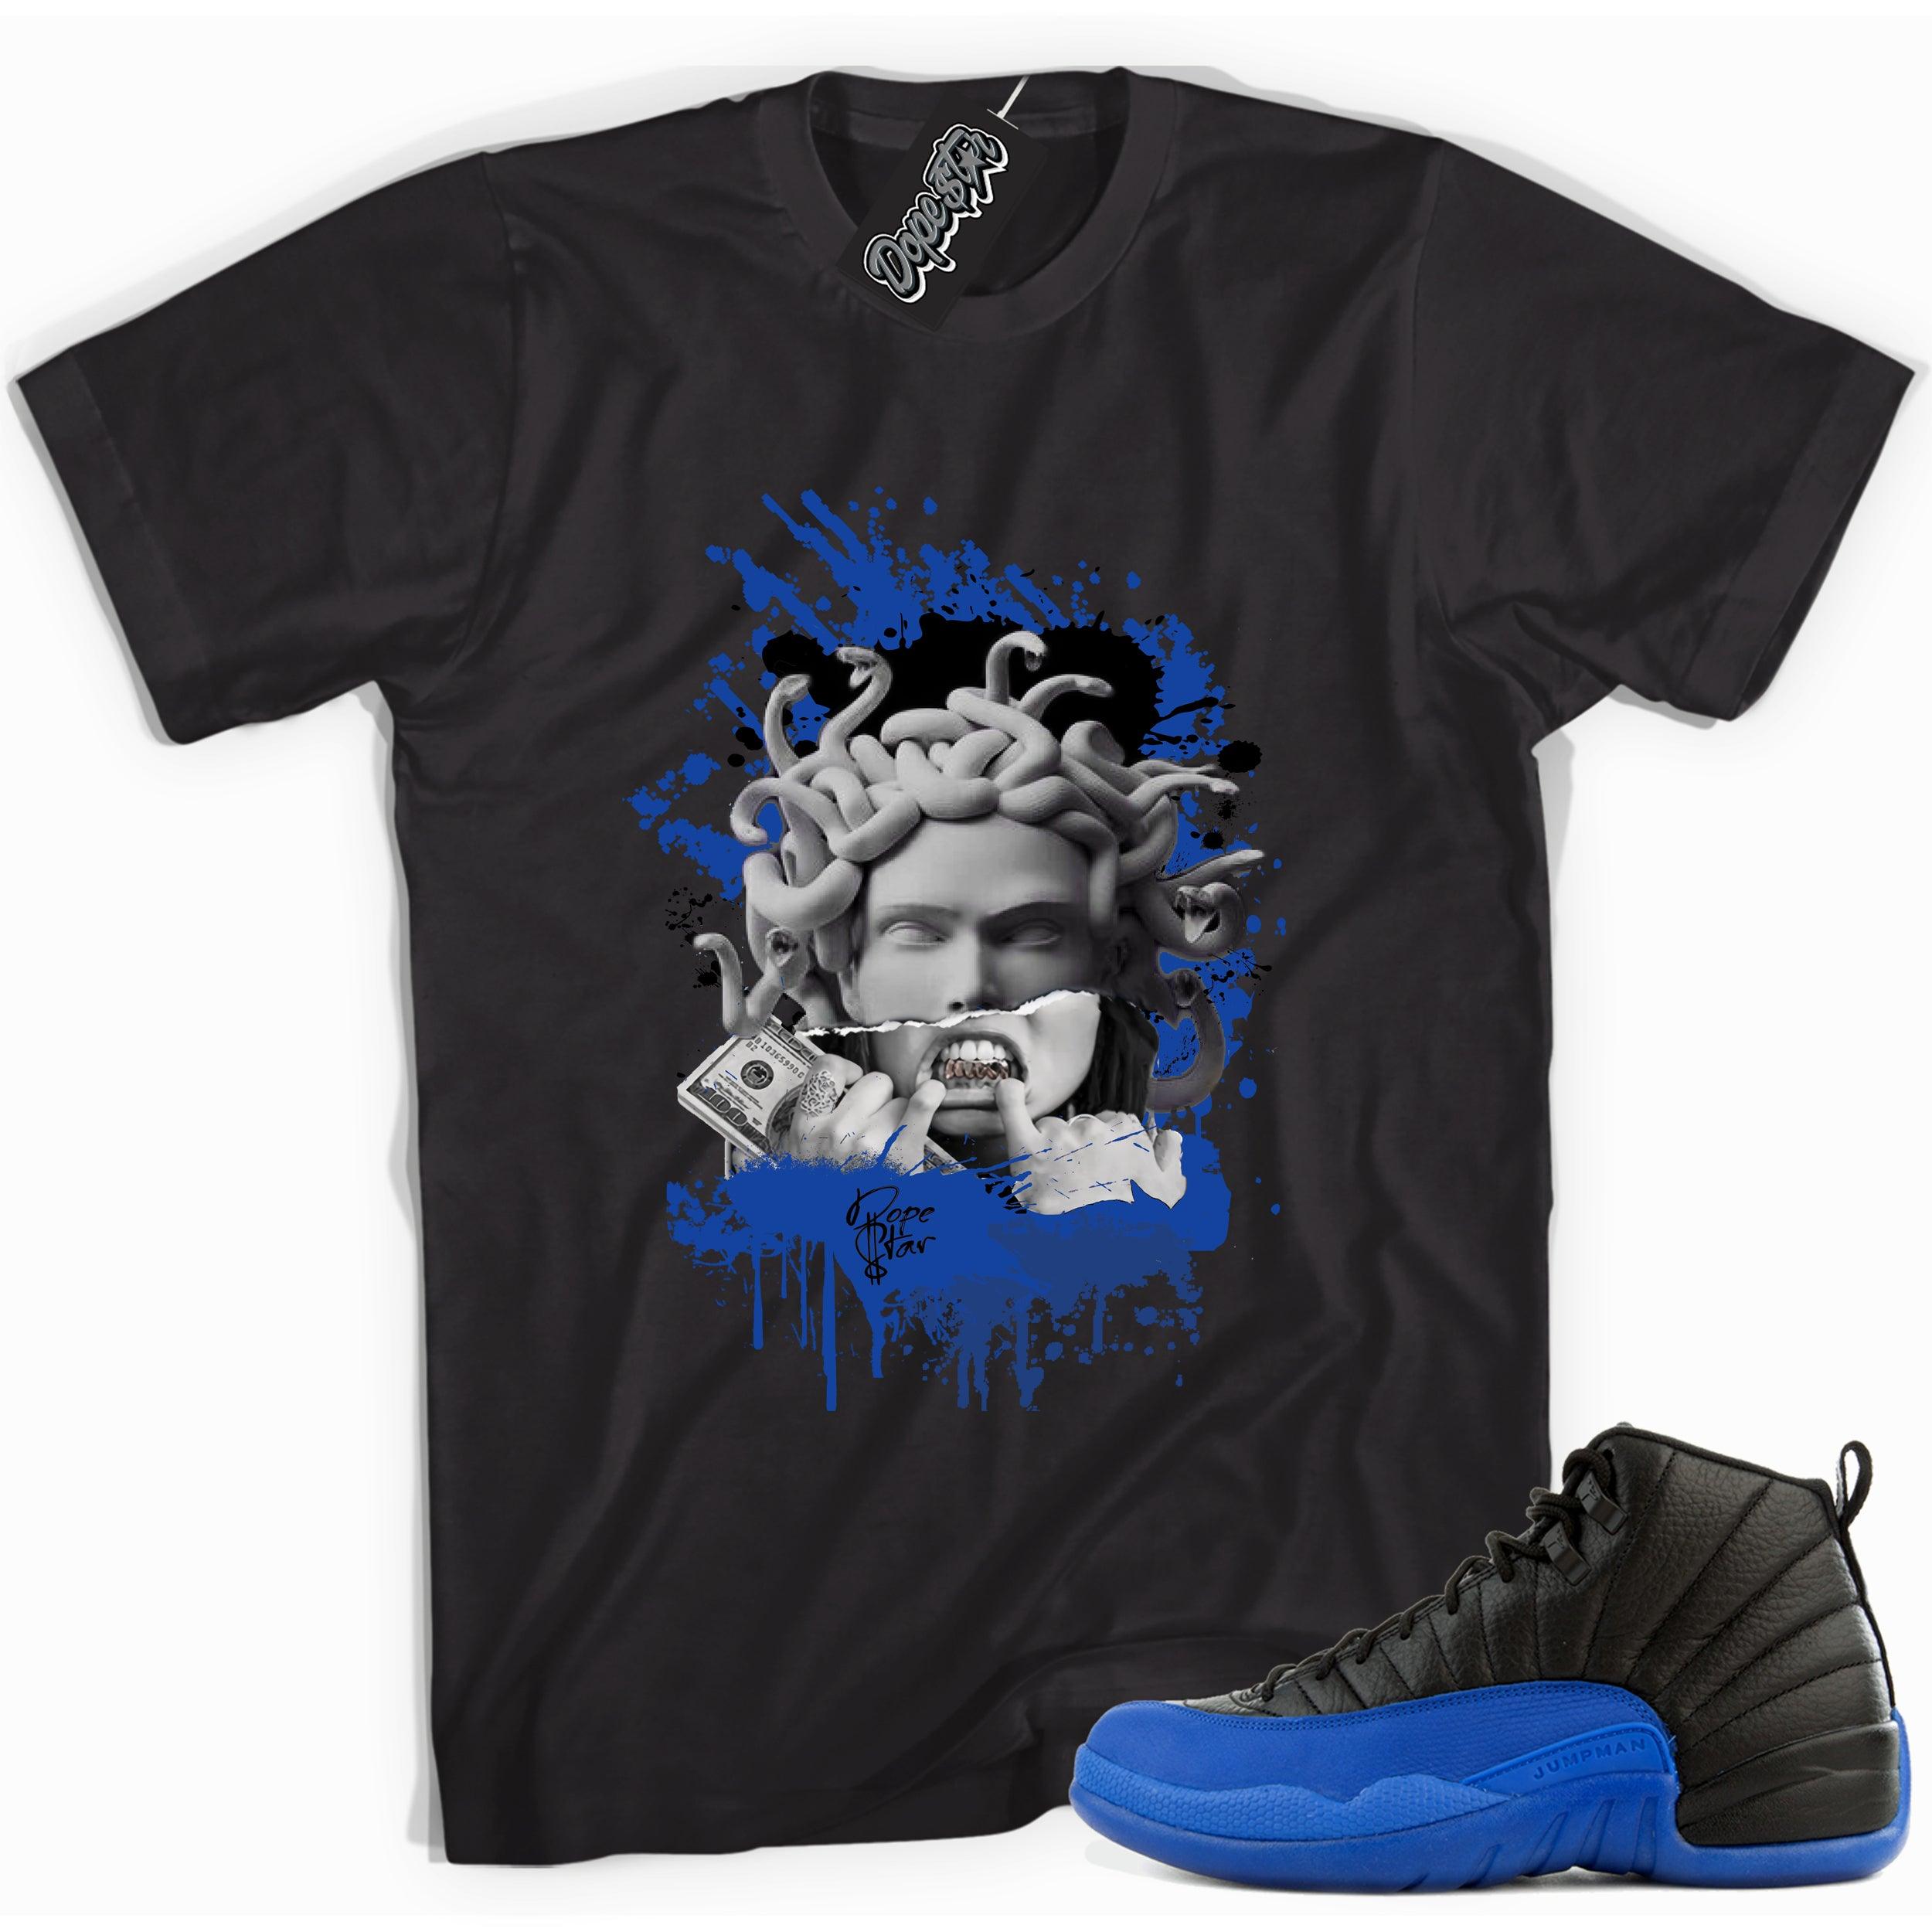 Cool black graphic tee with 'medusa' print, that perfectly matches  Air Jordan 12 Retro Black Game Royal sneakers.